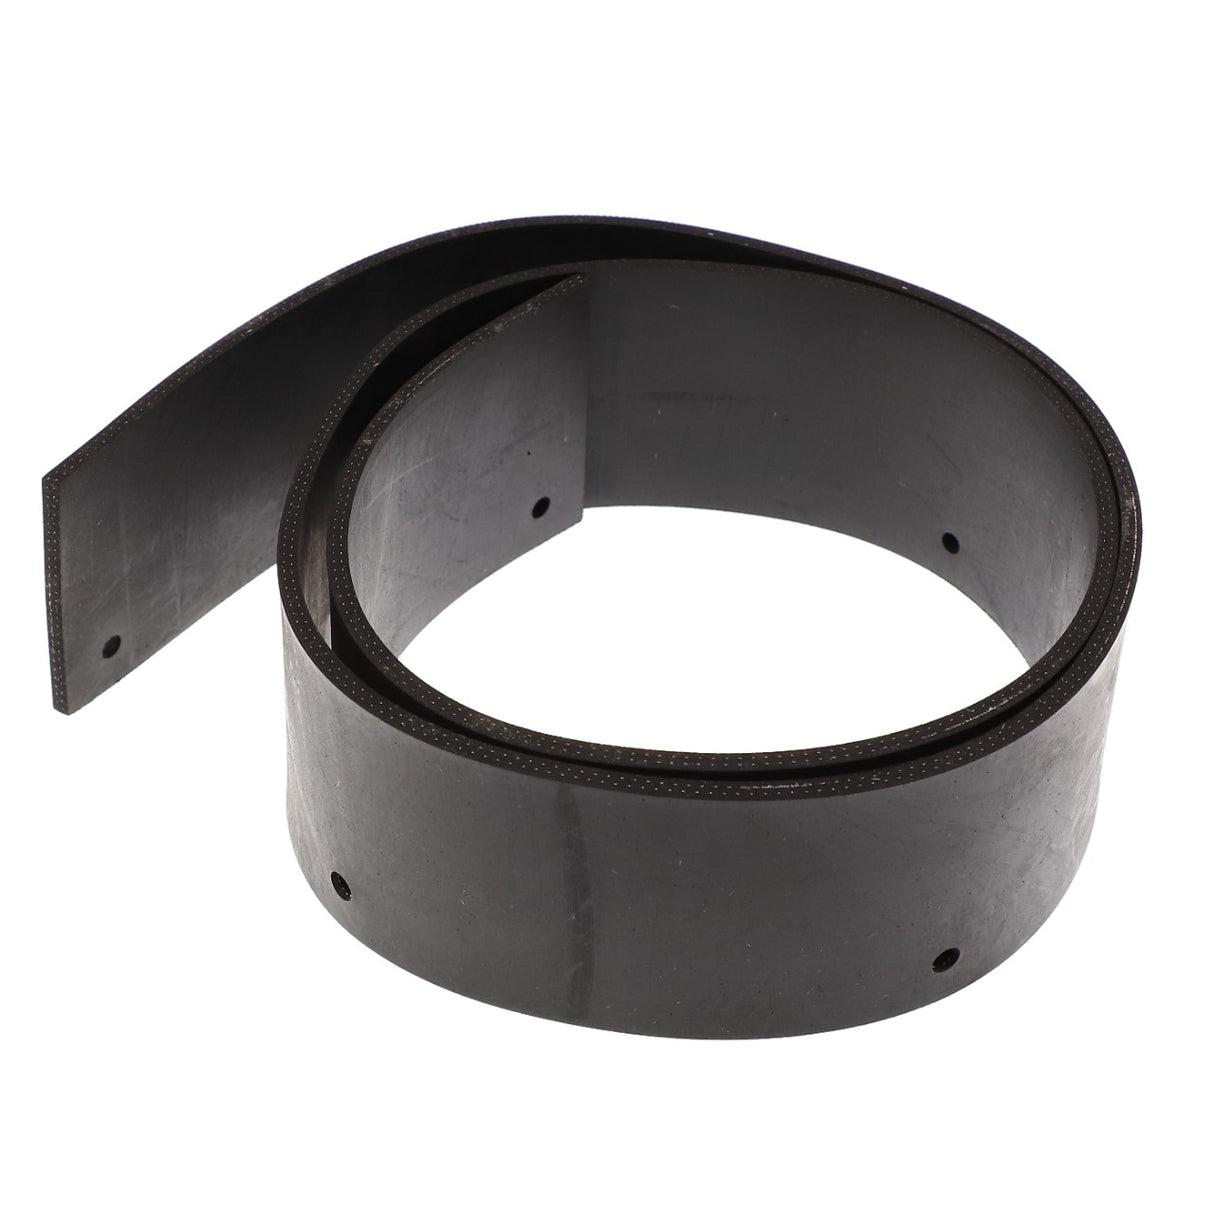 AGCO | Rubber Seal - Acx2346520 - Farming Parts